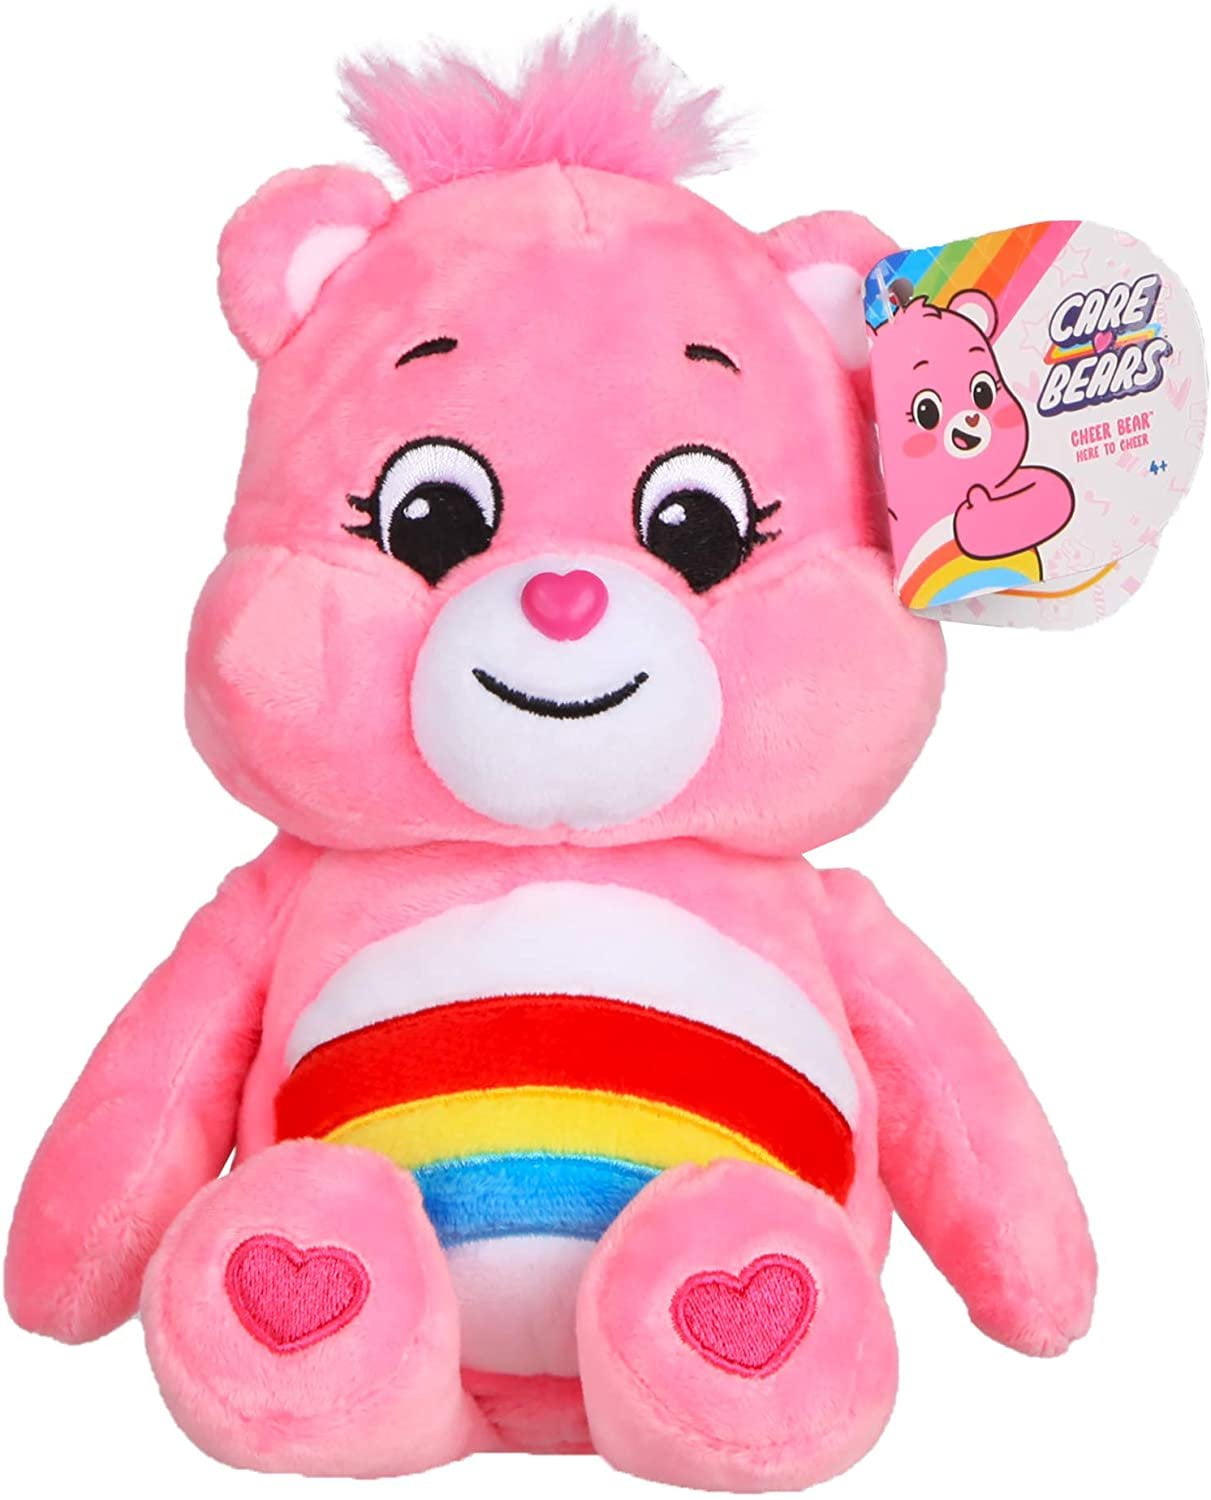 NEW OFFICIAL 12" CARE BEAR CHEER BEAR SOFT PLUSH TOY 